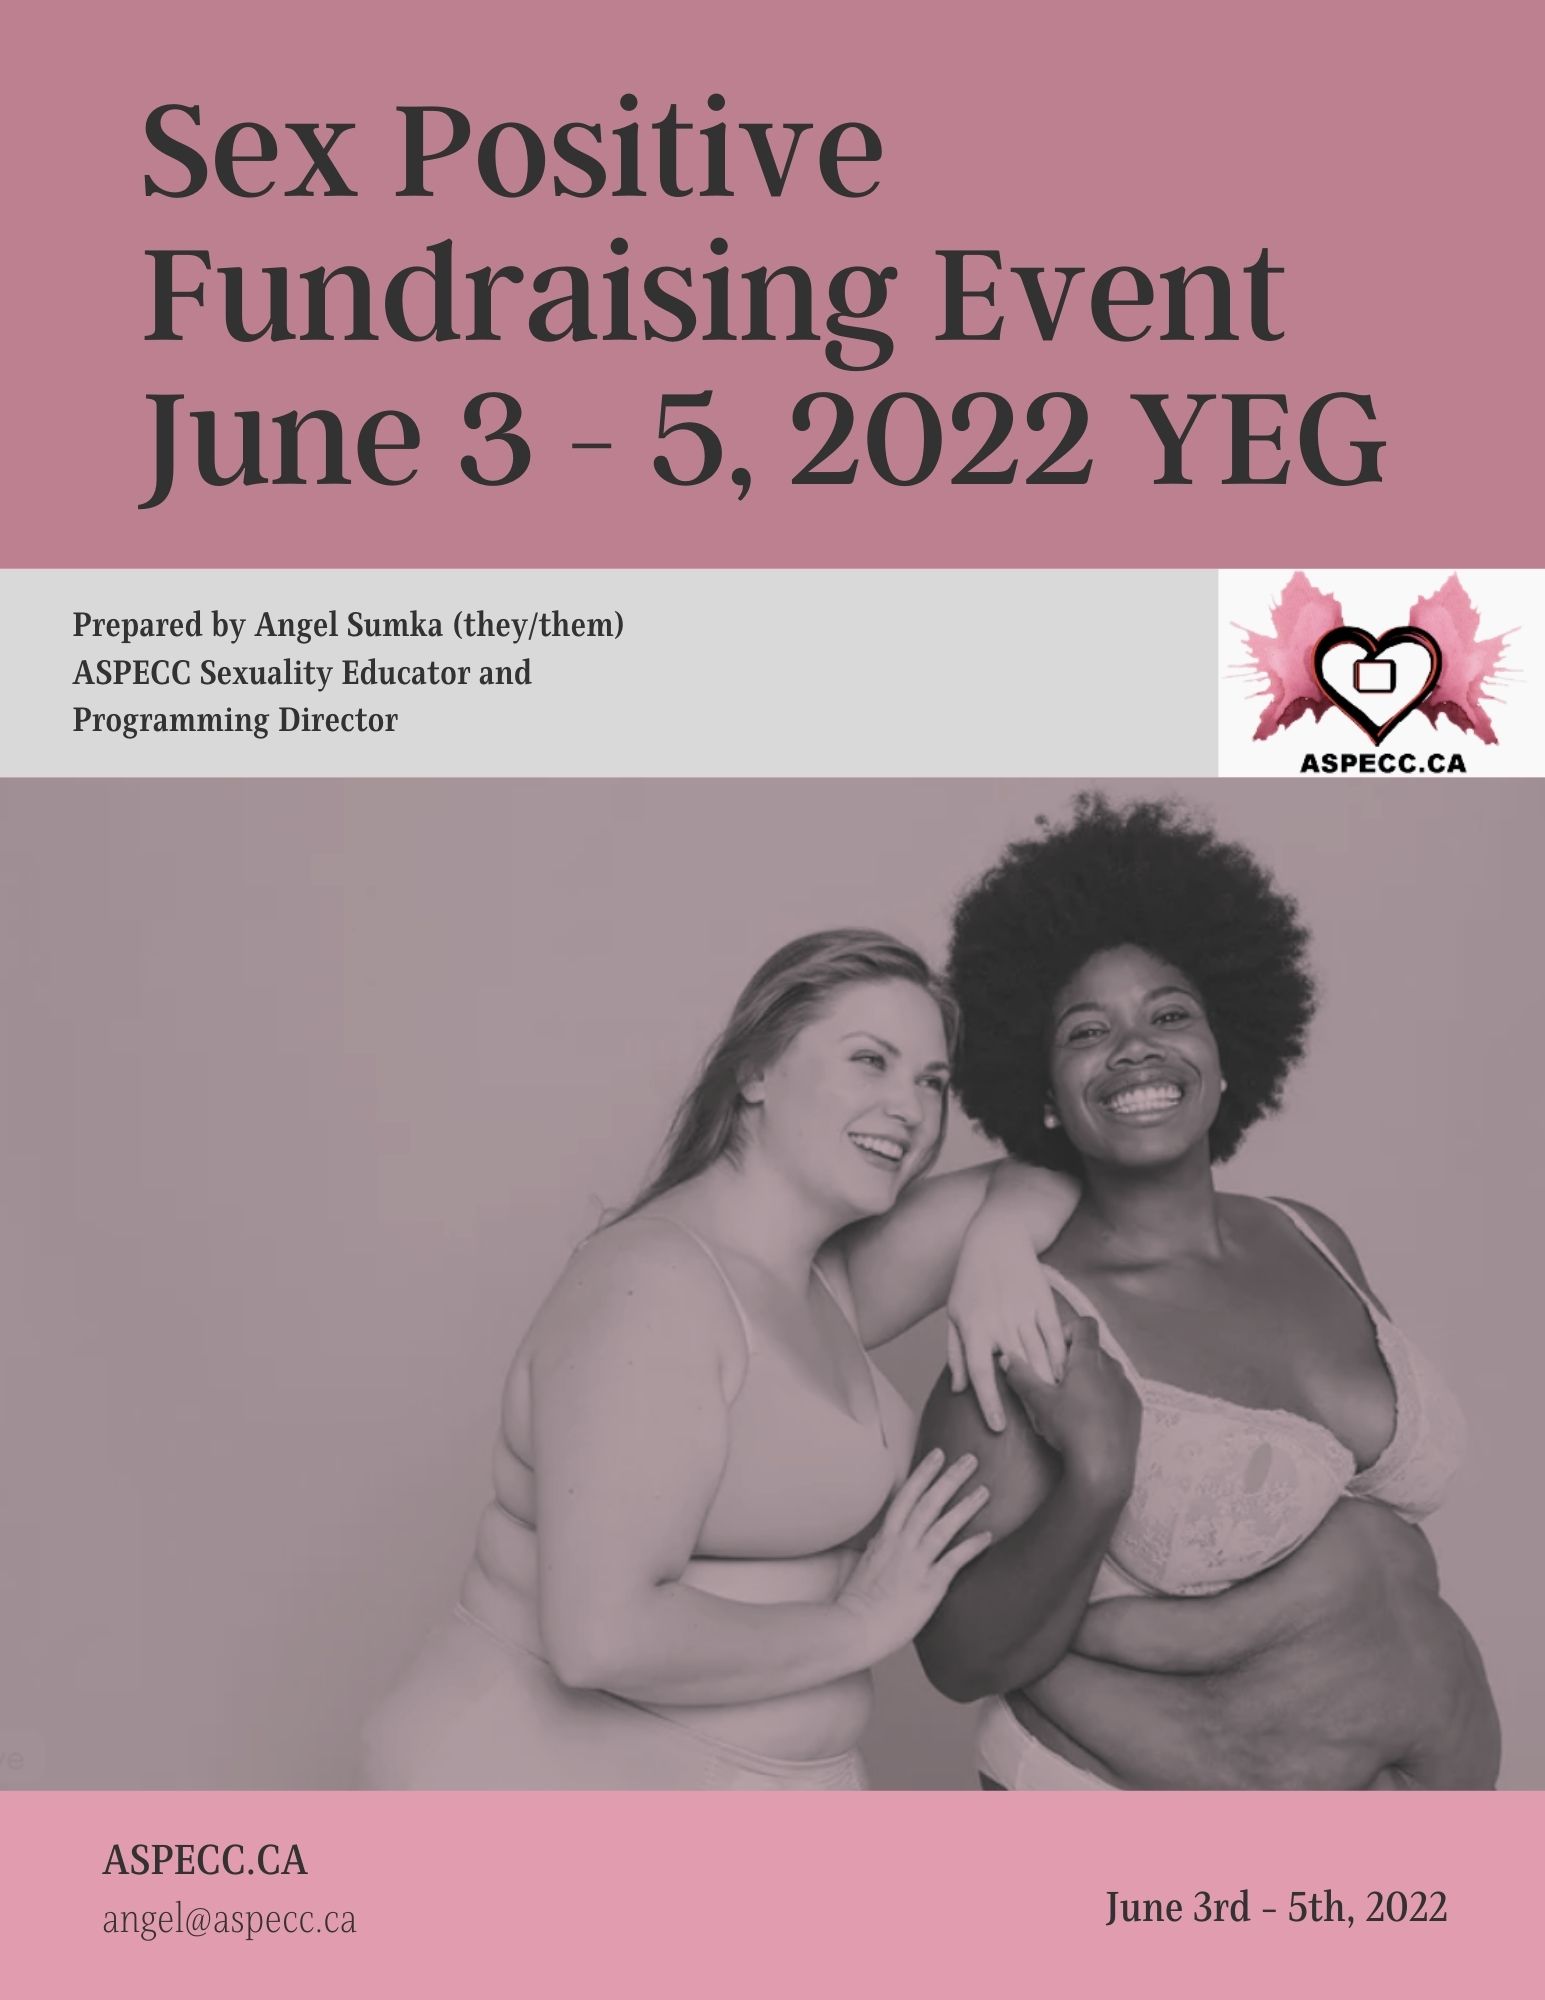 June 3 - 5 Fundraising Event Page 1